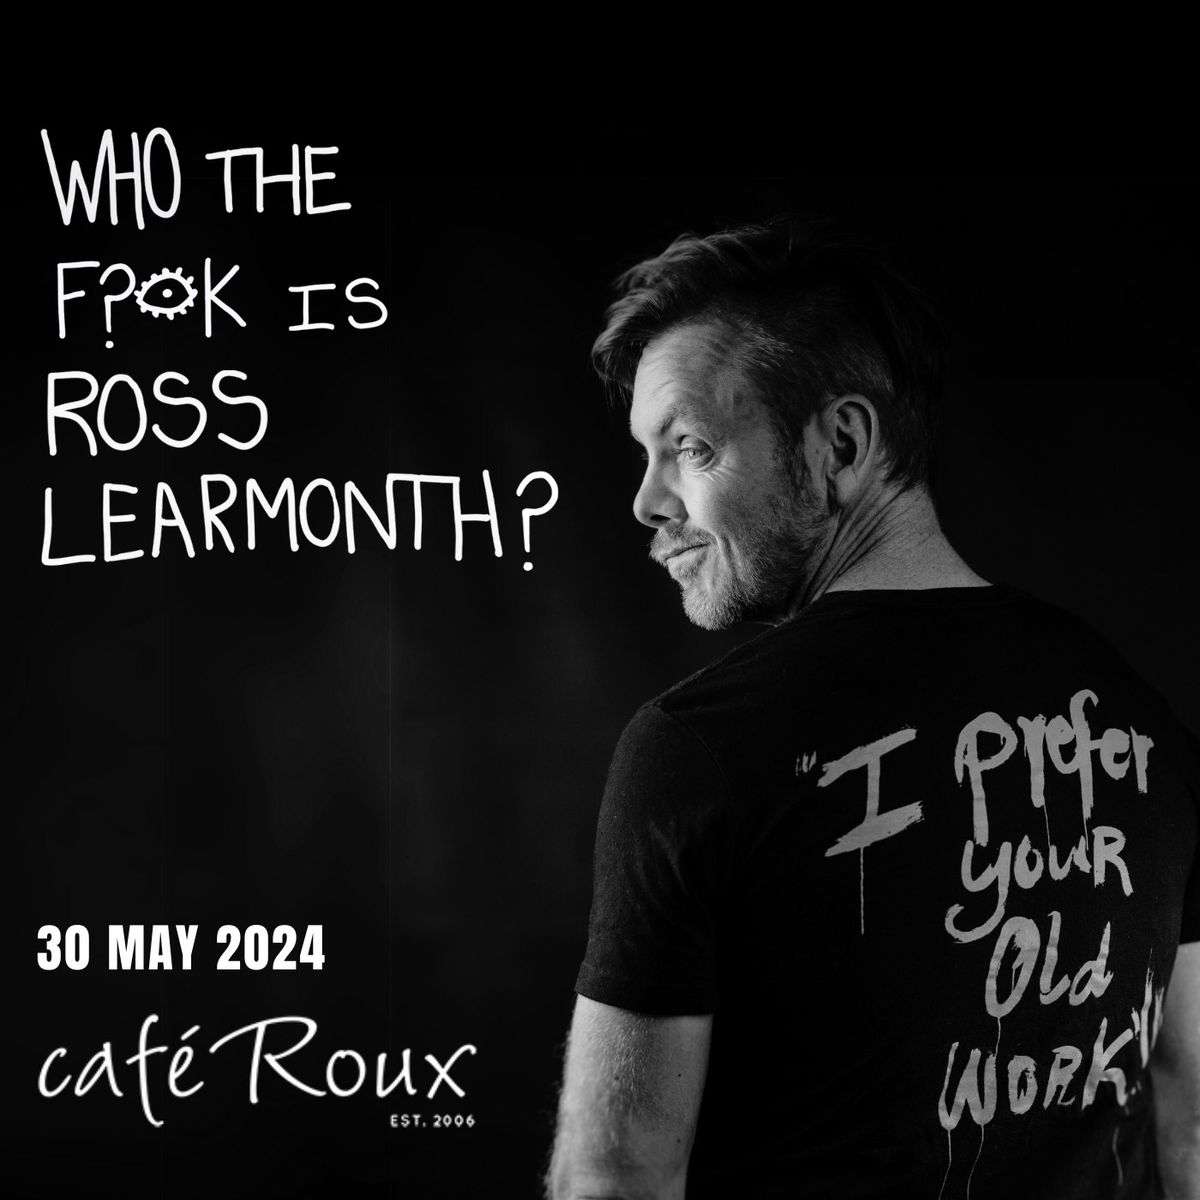 Who the f**k is Ross Learmonth?